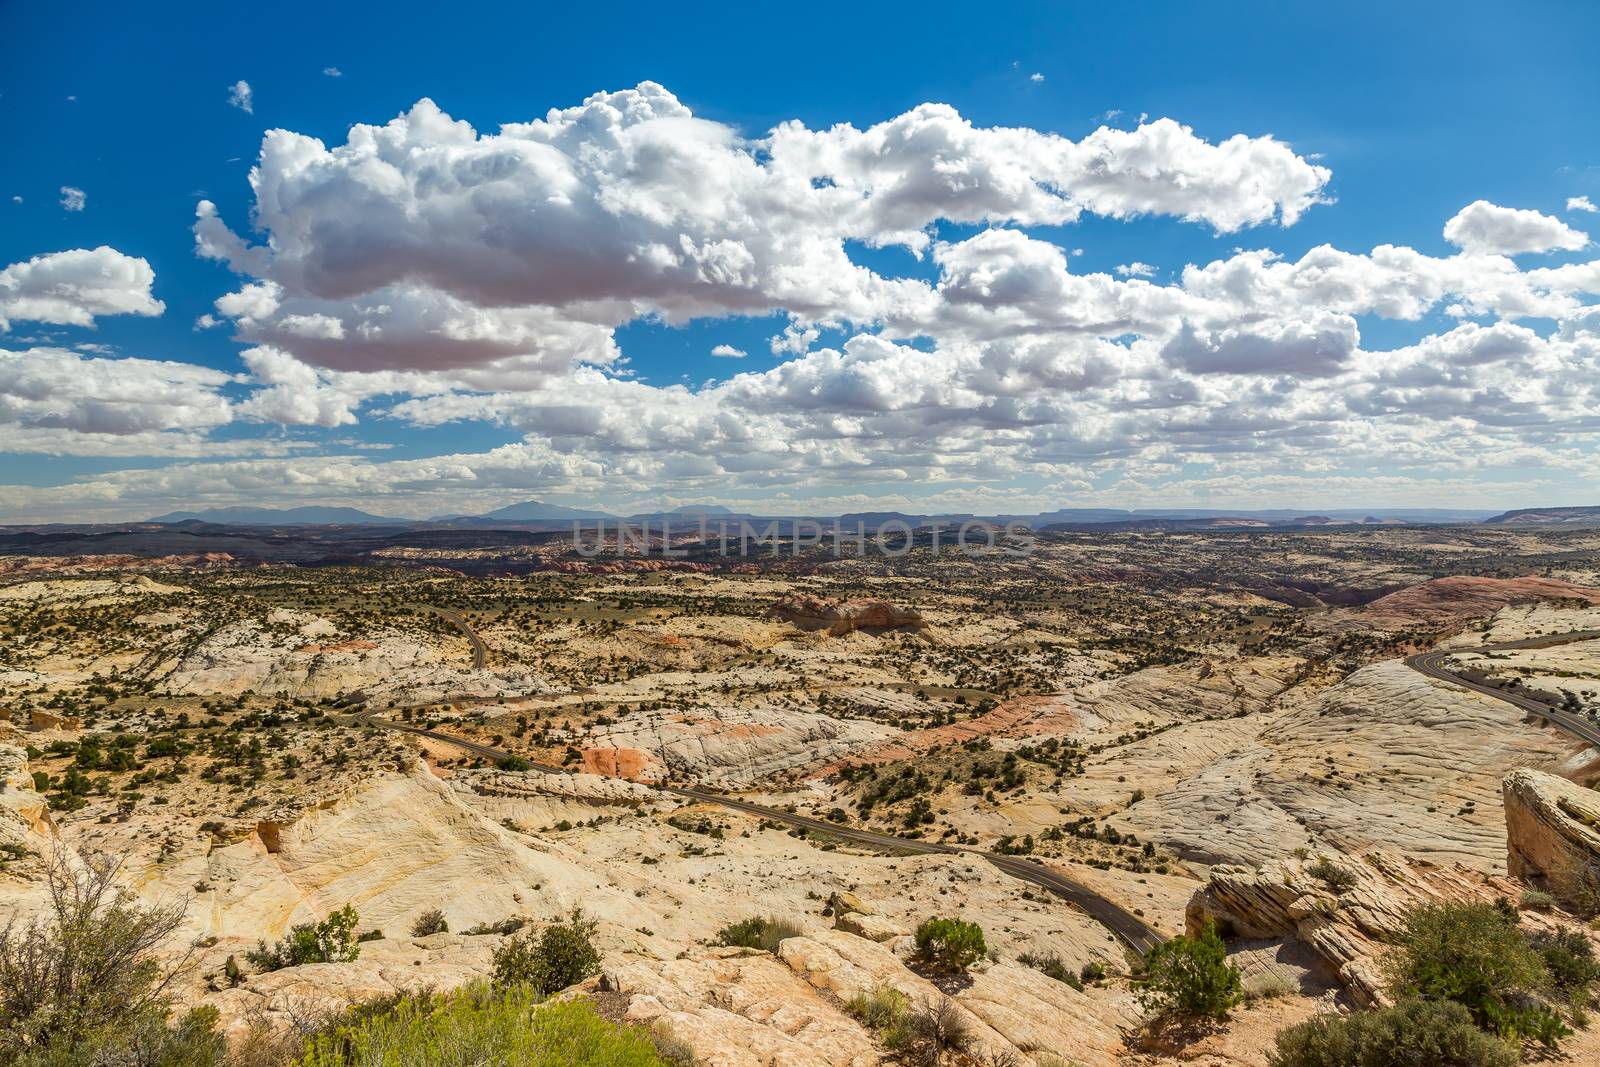 a view of the Grand Staircase Escalante National Monument from Scenic Route 12 at Head of the Rocks Overlook in Garfield County, Utah.